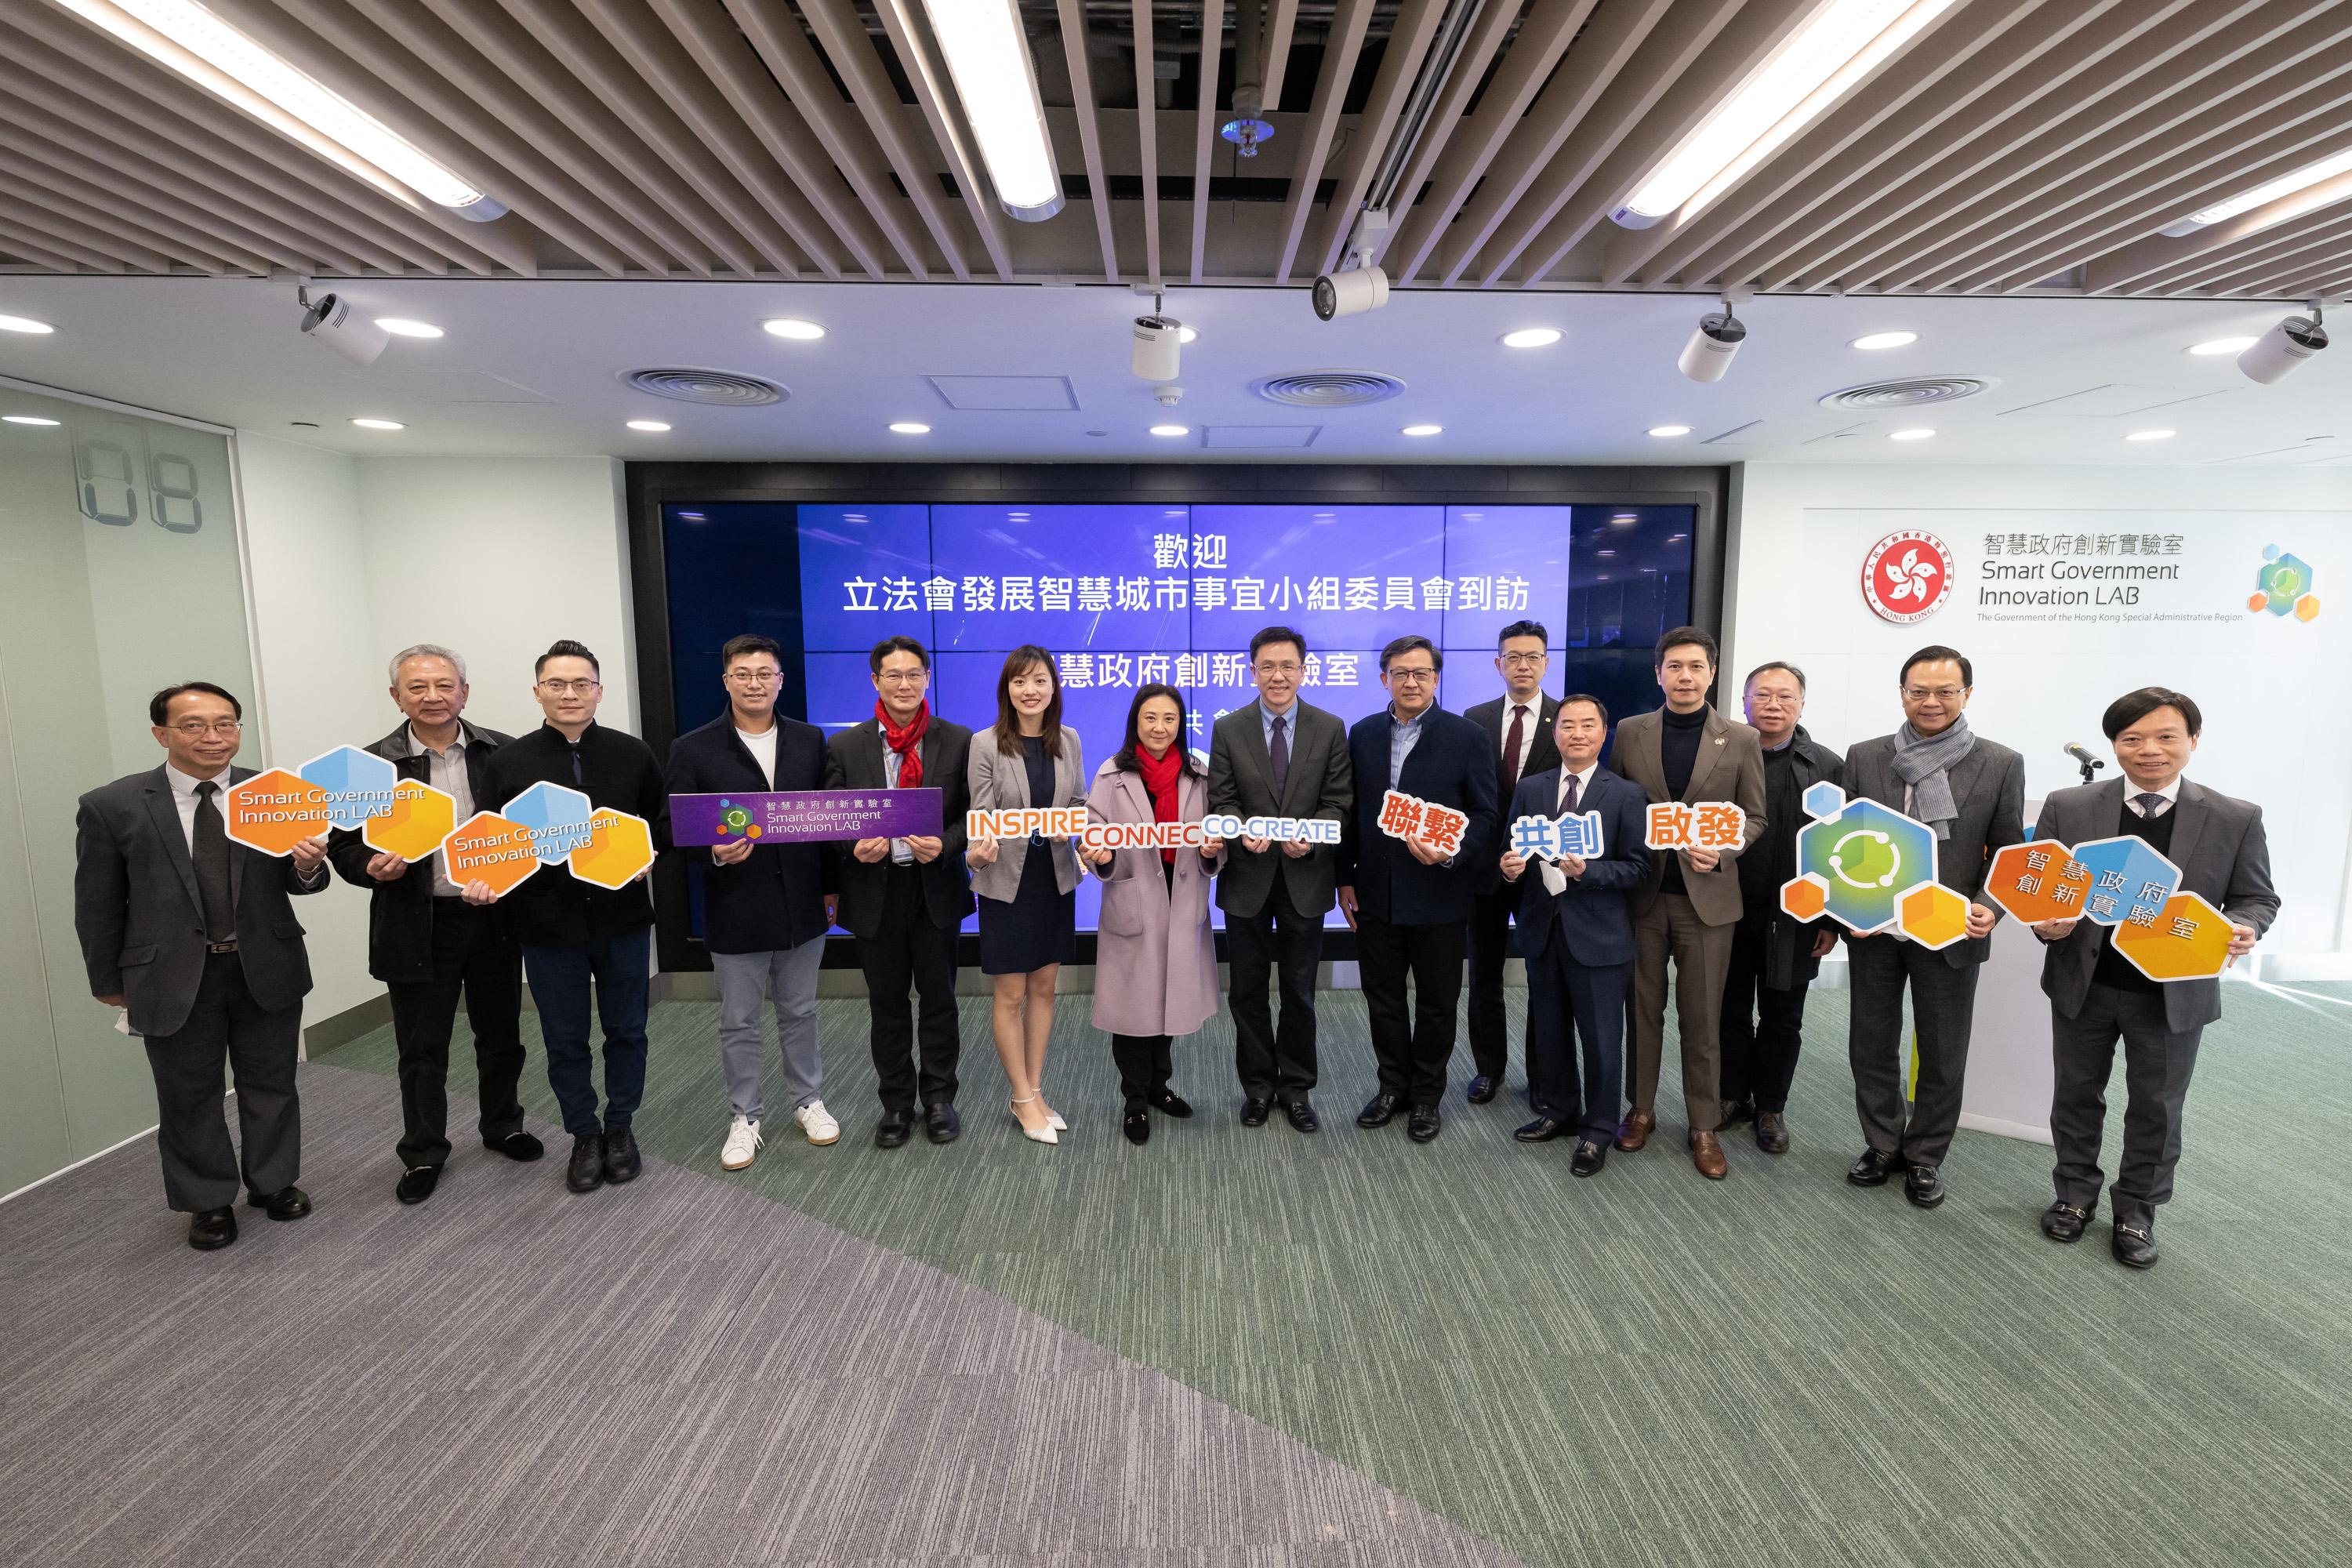 The Legislative Council (LegCo) Subcommittee on Matters Relating to the Development of Smart City visits the Smart Government Innovation Lab (Smart LAB) at Cyberport today (January 20). Photo shows LegCo Members posing for a group photo with representatives of the Government at the Smart LAB.